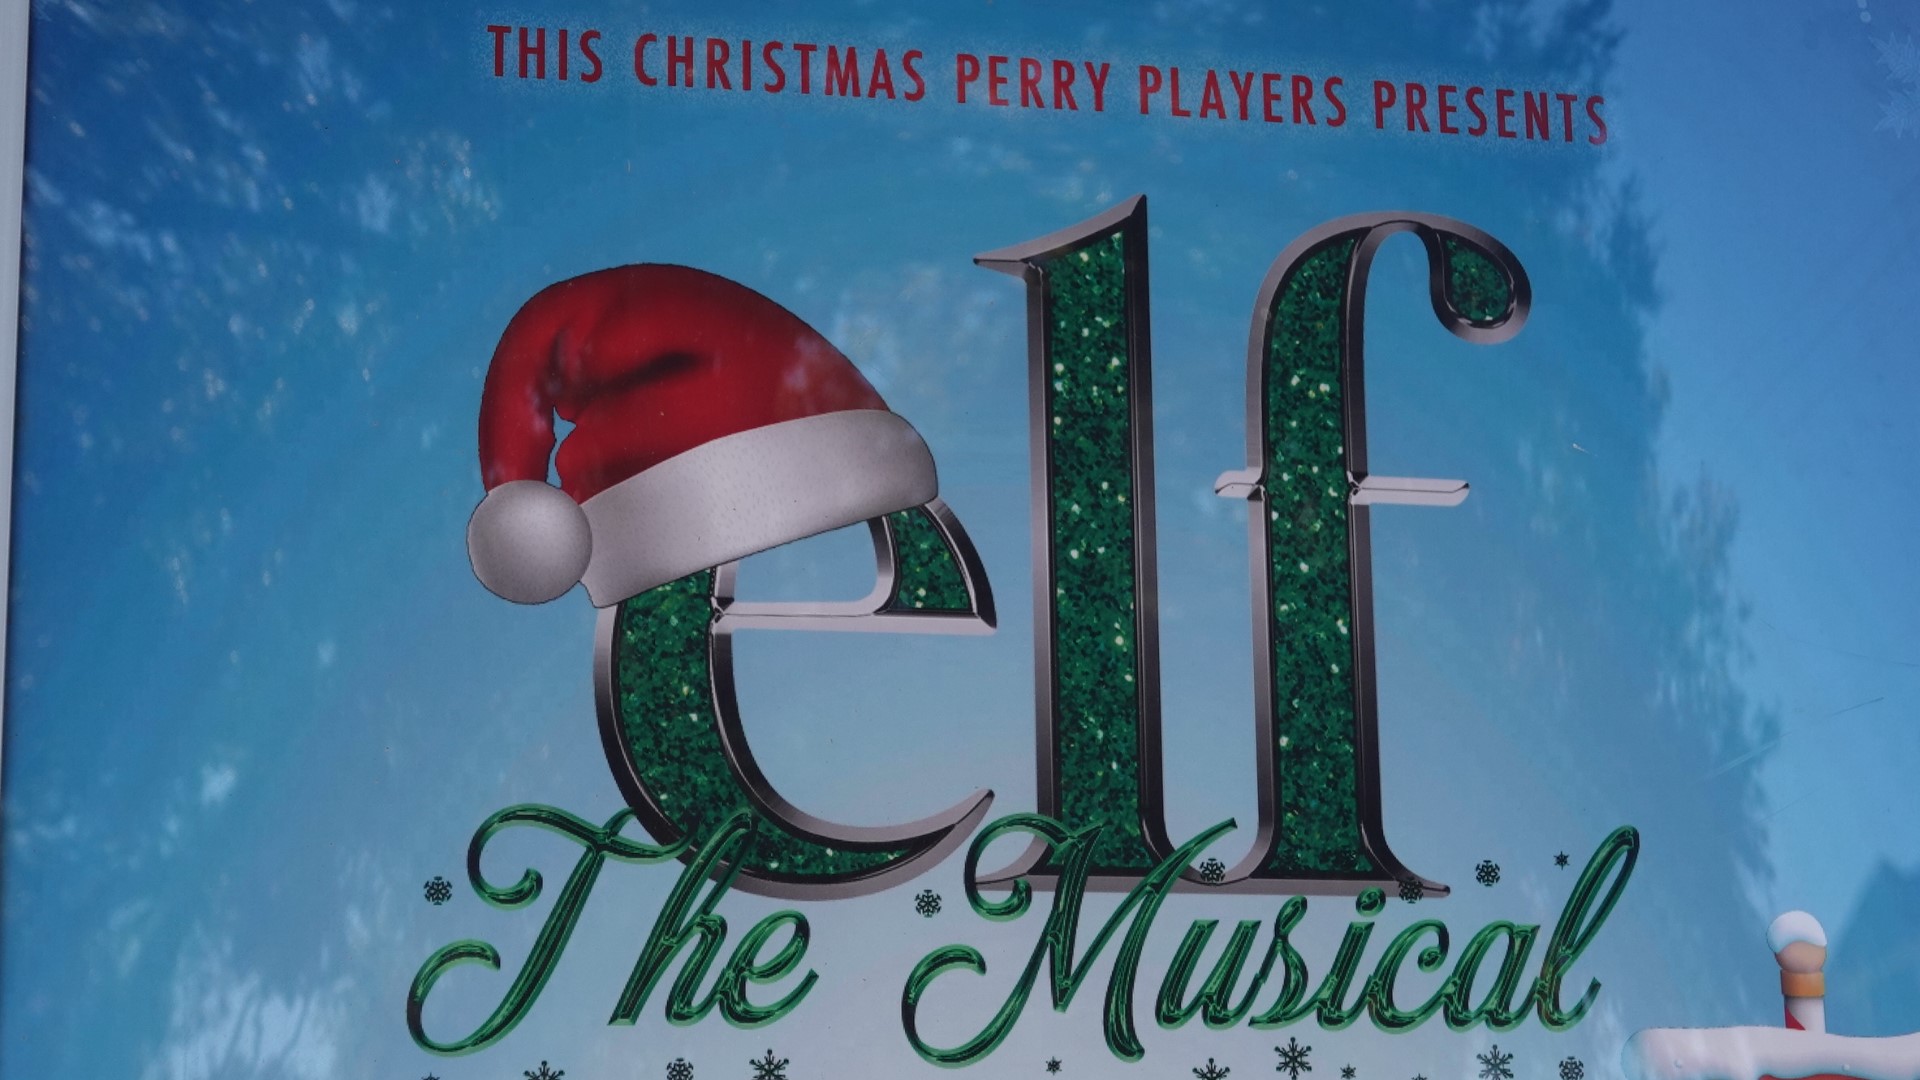 The musical closely follows the plot and comedy of the popular Will Ferrell movie, but it has the added bonus of a holiday musical score.